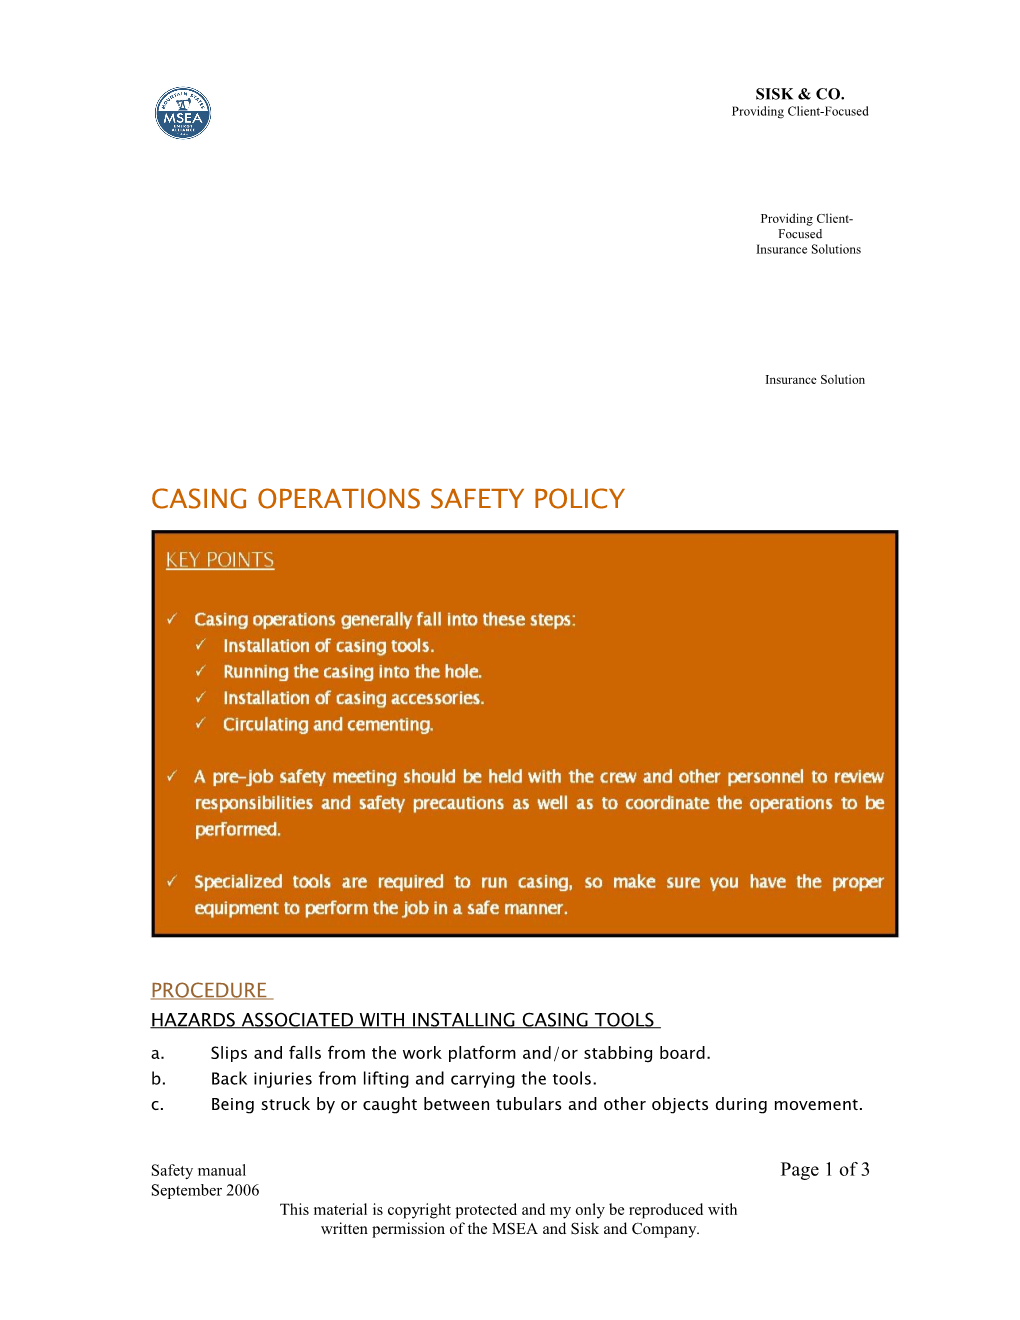 Casing Operations Safety Policy